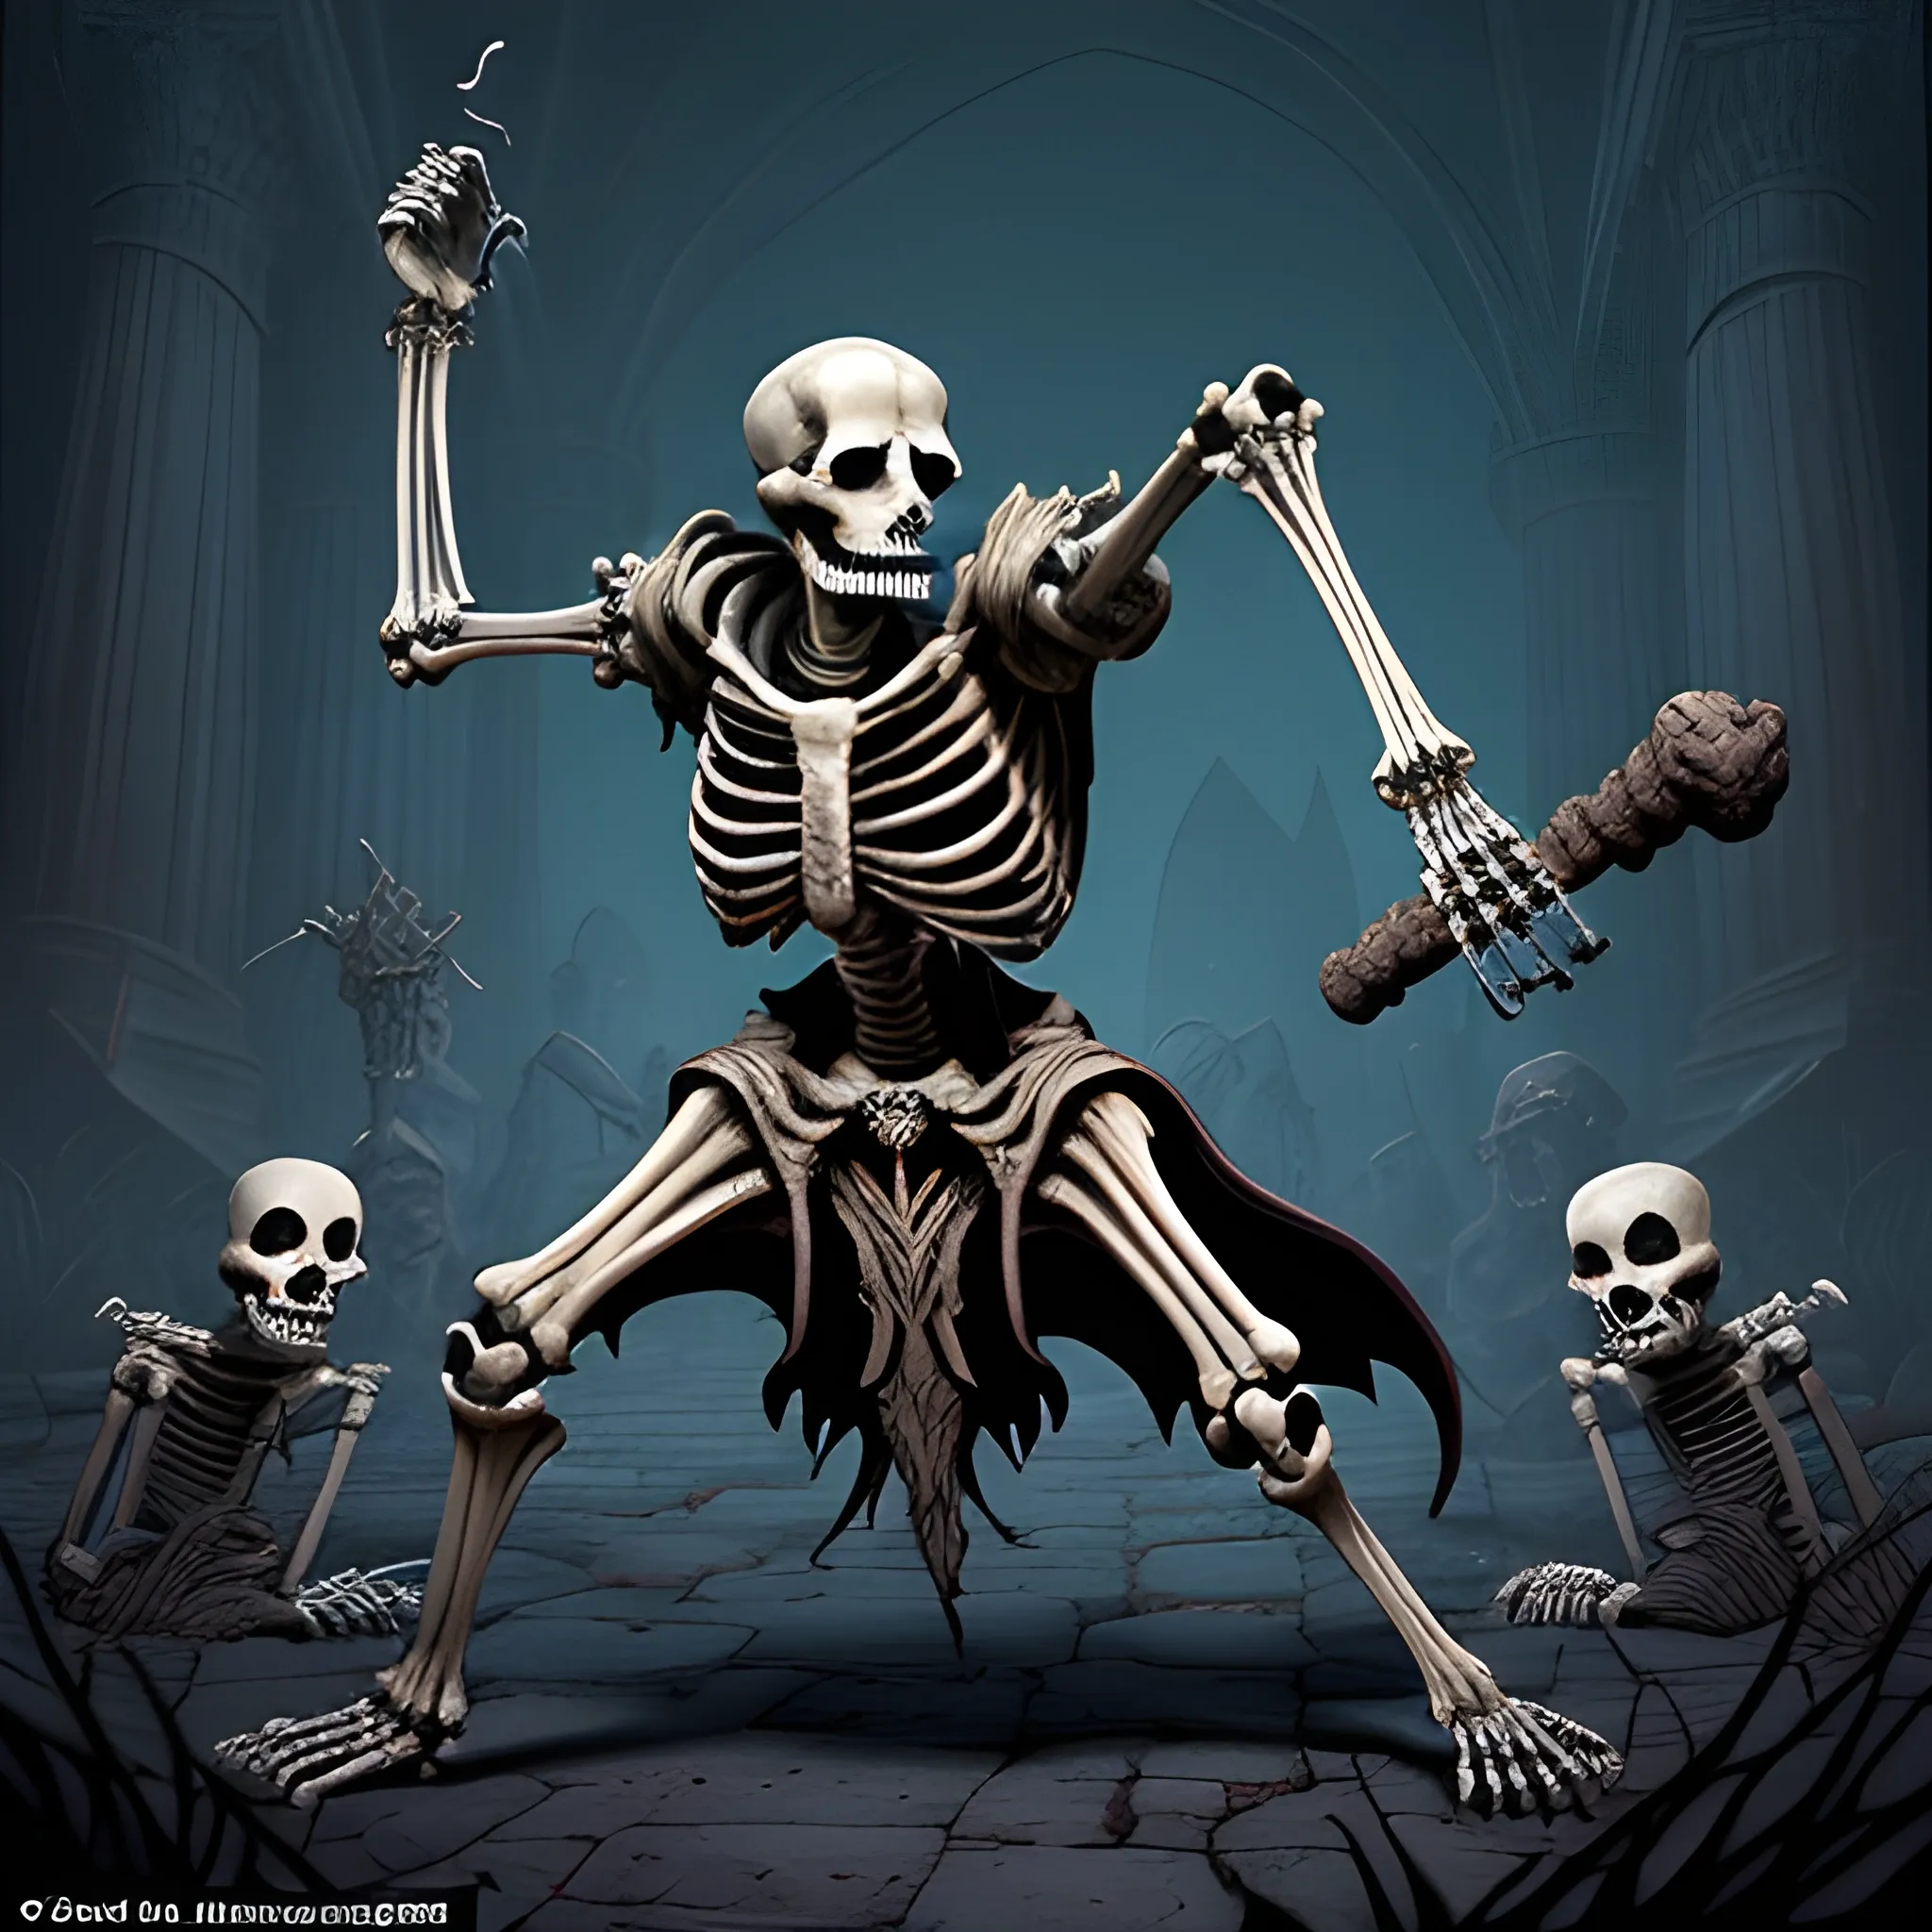 Appearance: A skeleton is a reanimated undead creature, the animated remains of a once-living being. They are skeletal in form, devoid of flesh and organs, and are held together by dark necromantic magic. Their bones can be of various sizes and shapes, depending on the creature they were before death. The bones of a humanoid skeleton are often bleached white, while those of larger creatures might retain a more weathered appearance.

Features: Skeletons are mindless creatures, devoid of the emotions and intellect they possessed in life. Their movements are stiff and jerky, controlled by the magic that animates them. They lack the strength and capabilities they had in life but can still be formidable due to their resistance to exhaustion and immunity to poison and many mind-affecting spells.

Habitat: Skeletons can be found in various environments, wherever dark necromantic magic is practiced or where ancient burial sites have been disturbed. They are often encountered in crypts, dungeons, or as guardians of forgotten tombs. In your DND world, they might be the remnants of fallen warriors or victims of dark rituals, arising to serve their necromantic masters.

Behavior: As mindless undead, skeletons are compelled to follow the commands of their creators or necromancers who control them. They have no will of their own and exist solely to fulfill the tasks assigned to them. Whether that means guarding a location, attacking intruders, or carrying out a specific purpose, skeletons are bound to carry out their orders until they are destroyed.

Role in the World: In your DND world, skeletons could serve as a constant reminder of the dark arts and the dangers of necromancy. They may be used by evil necromancers as minions or guardians, lurking in ancient crypts or dungeons to deter intruders. Adventurers might encounter them in their quest to thwart dark forces or uncover the secrets of long-forgotten ruins.

Encountering a skeleton in your campaign often means dealing with a mindless foe that is immune to many traditional methods of persuasion. Adventurers might use various tactics to overcome them, such as using holy magic, radiant damage, or weapons that can shatter or disassemble the undead. While individually not as threatening as some other creatures, the real challenge lies in facing hordes of skeletons, as their numbers can quickly overwhelm unprepared adventurers.